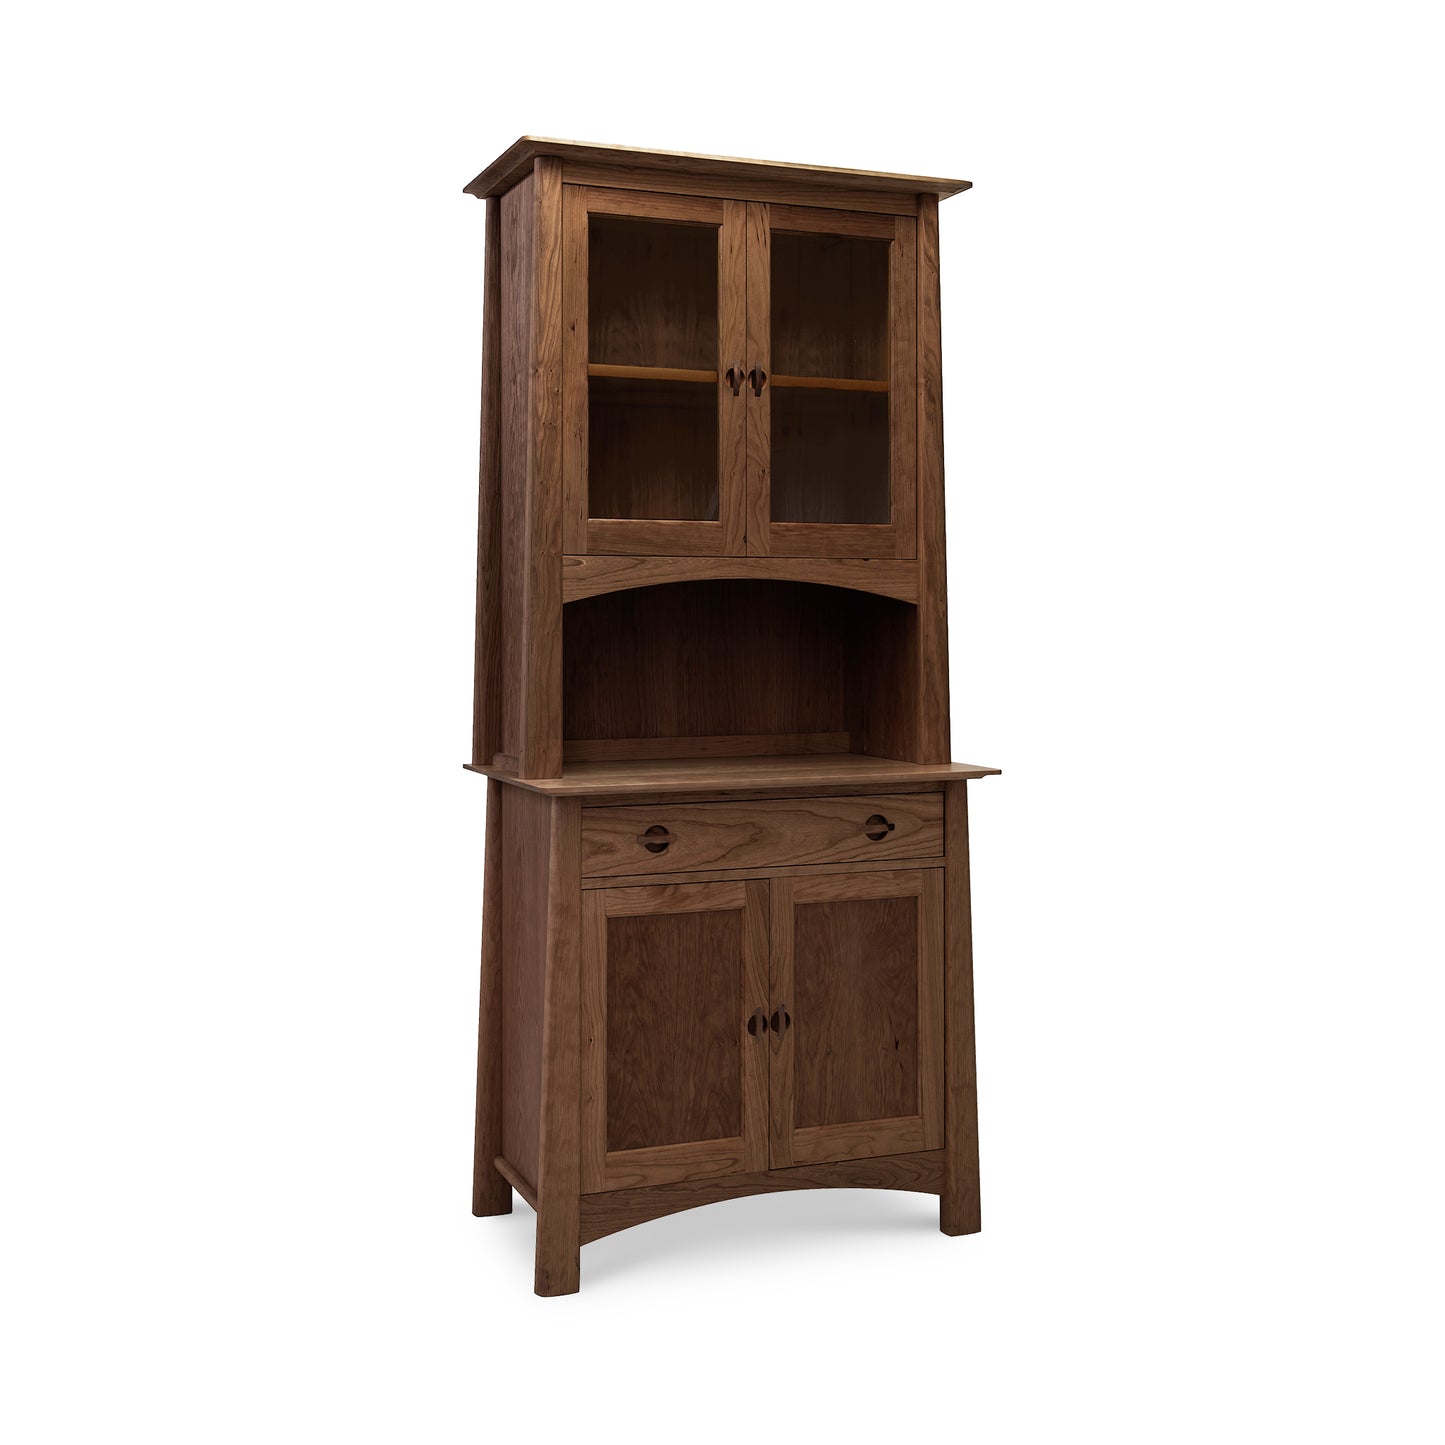 A luxury Maple Corner Woodworks Cherry Moon Small China Cabinet with glass-panel upper doors and solid lower doors against a white background.